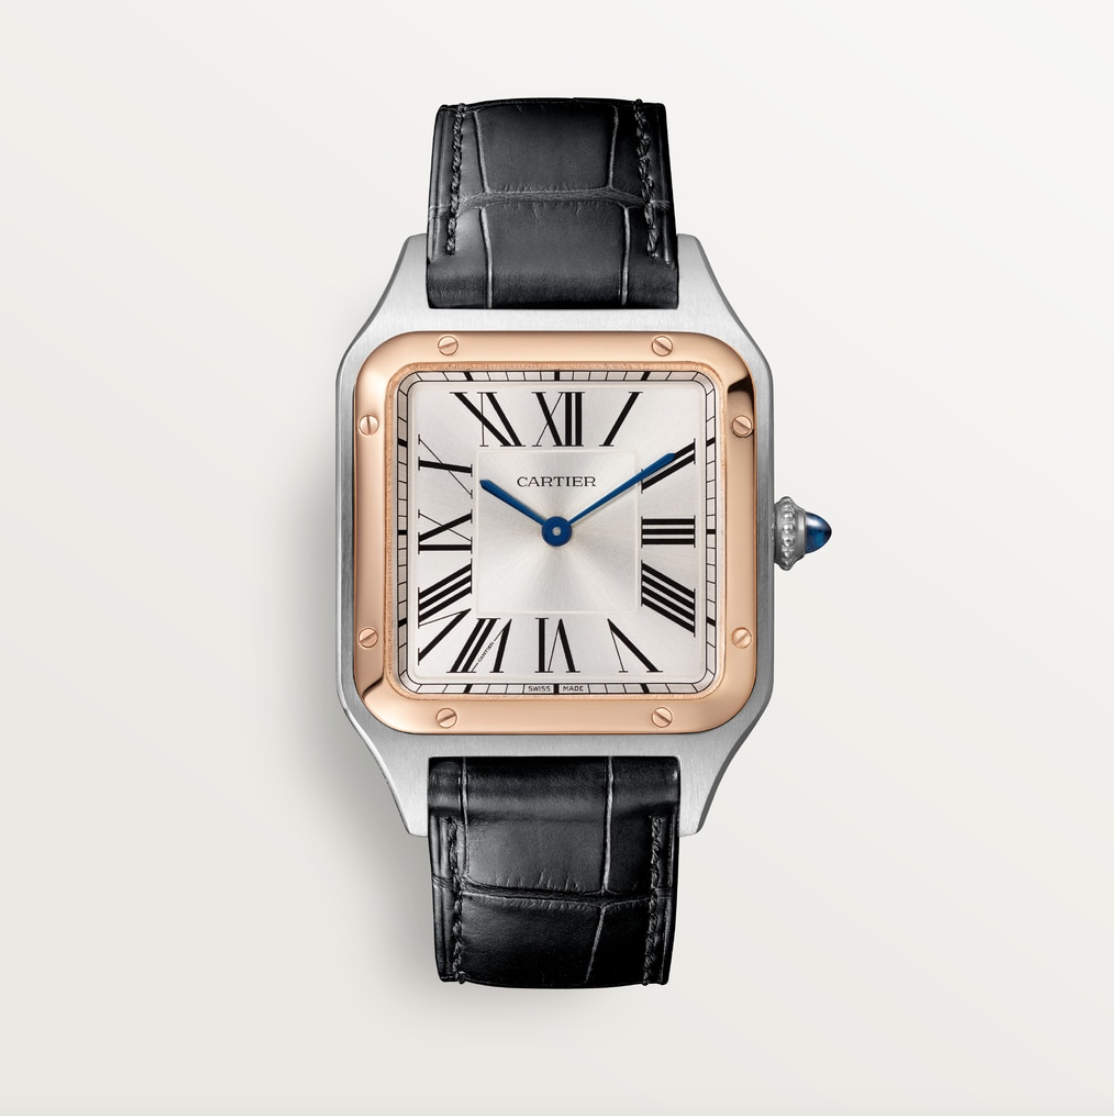 20 Classic Watches That Are Collectible Pieces | WatchShopping.com